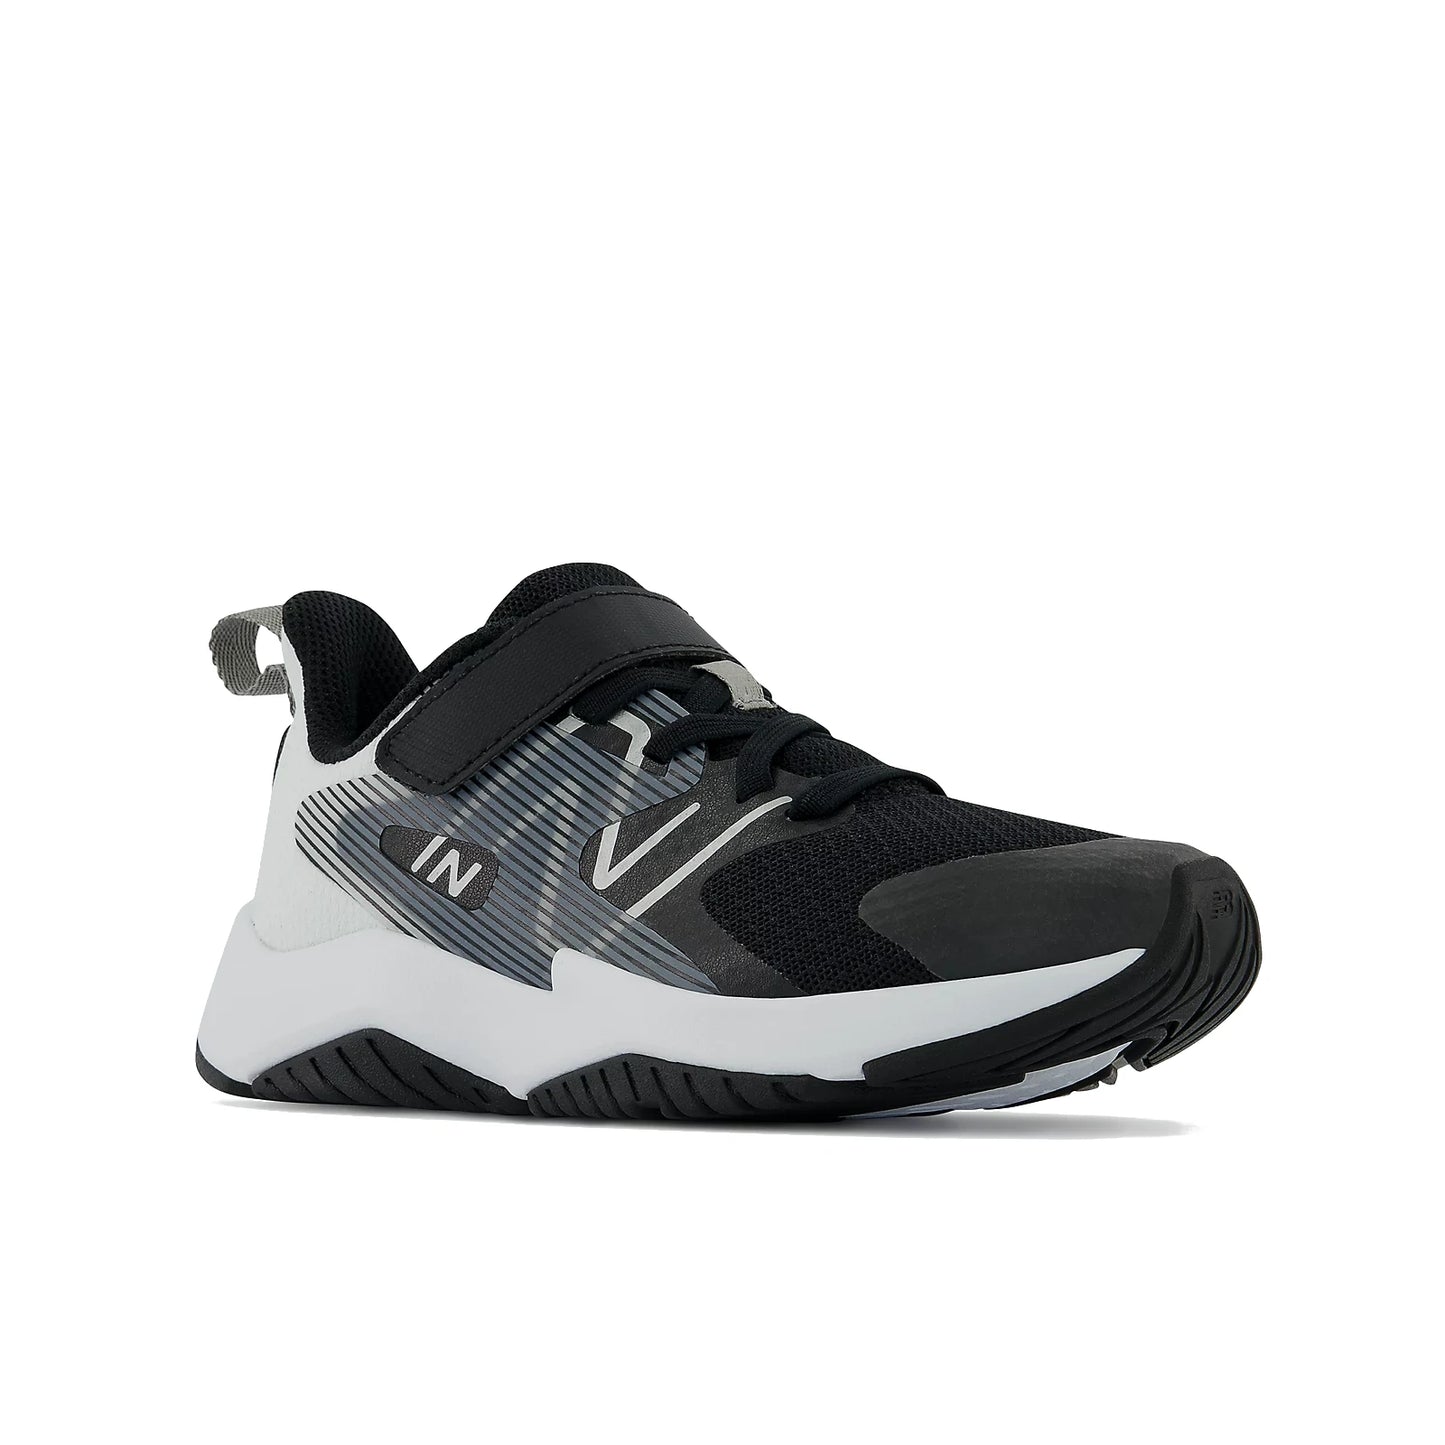 New Balance Kids' Rave Run v2 Bungee Lace with Top Strap - Black/White